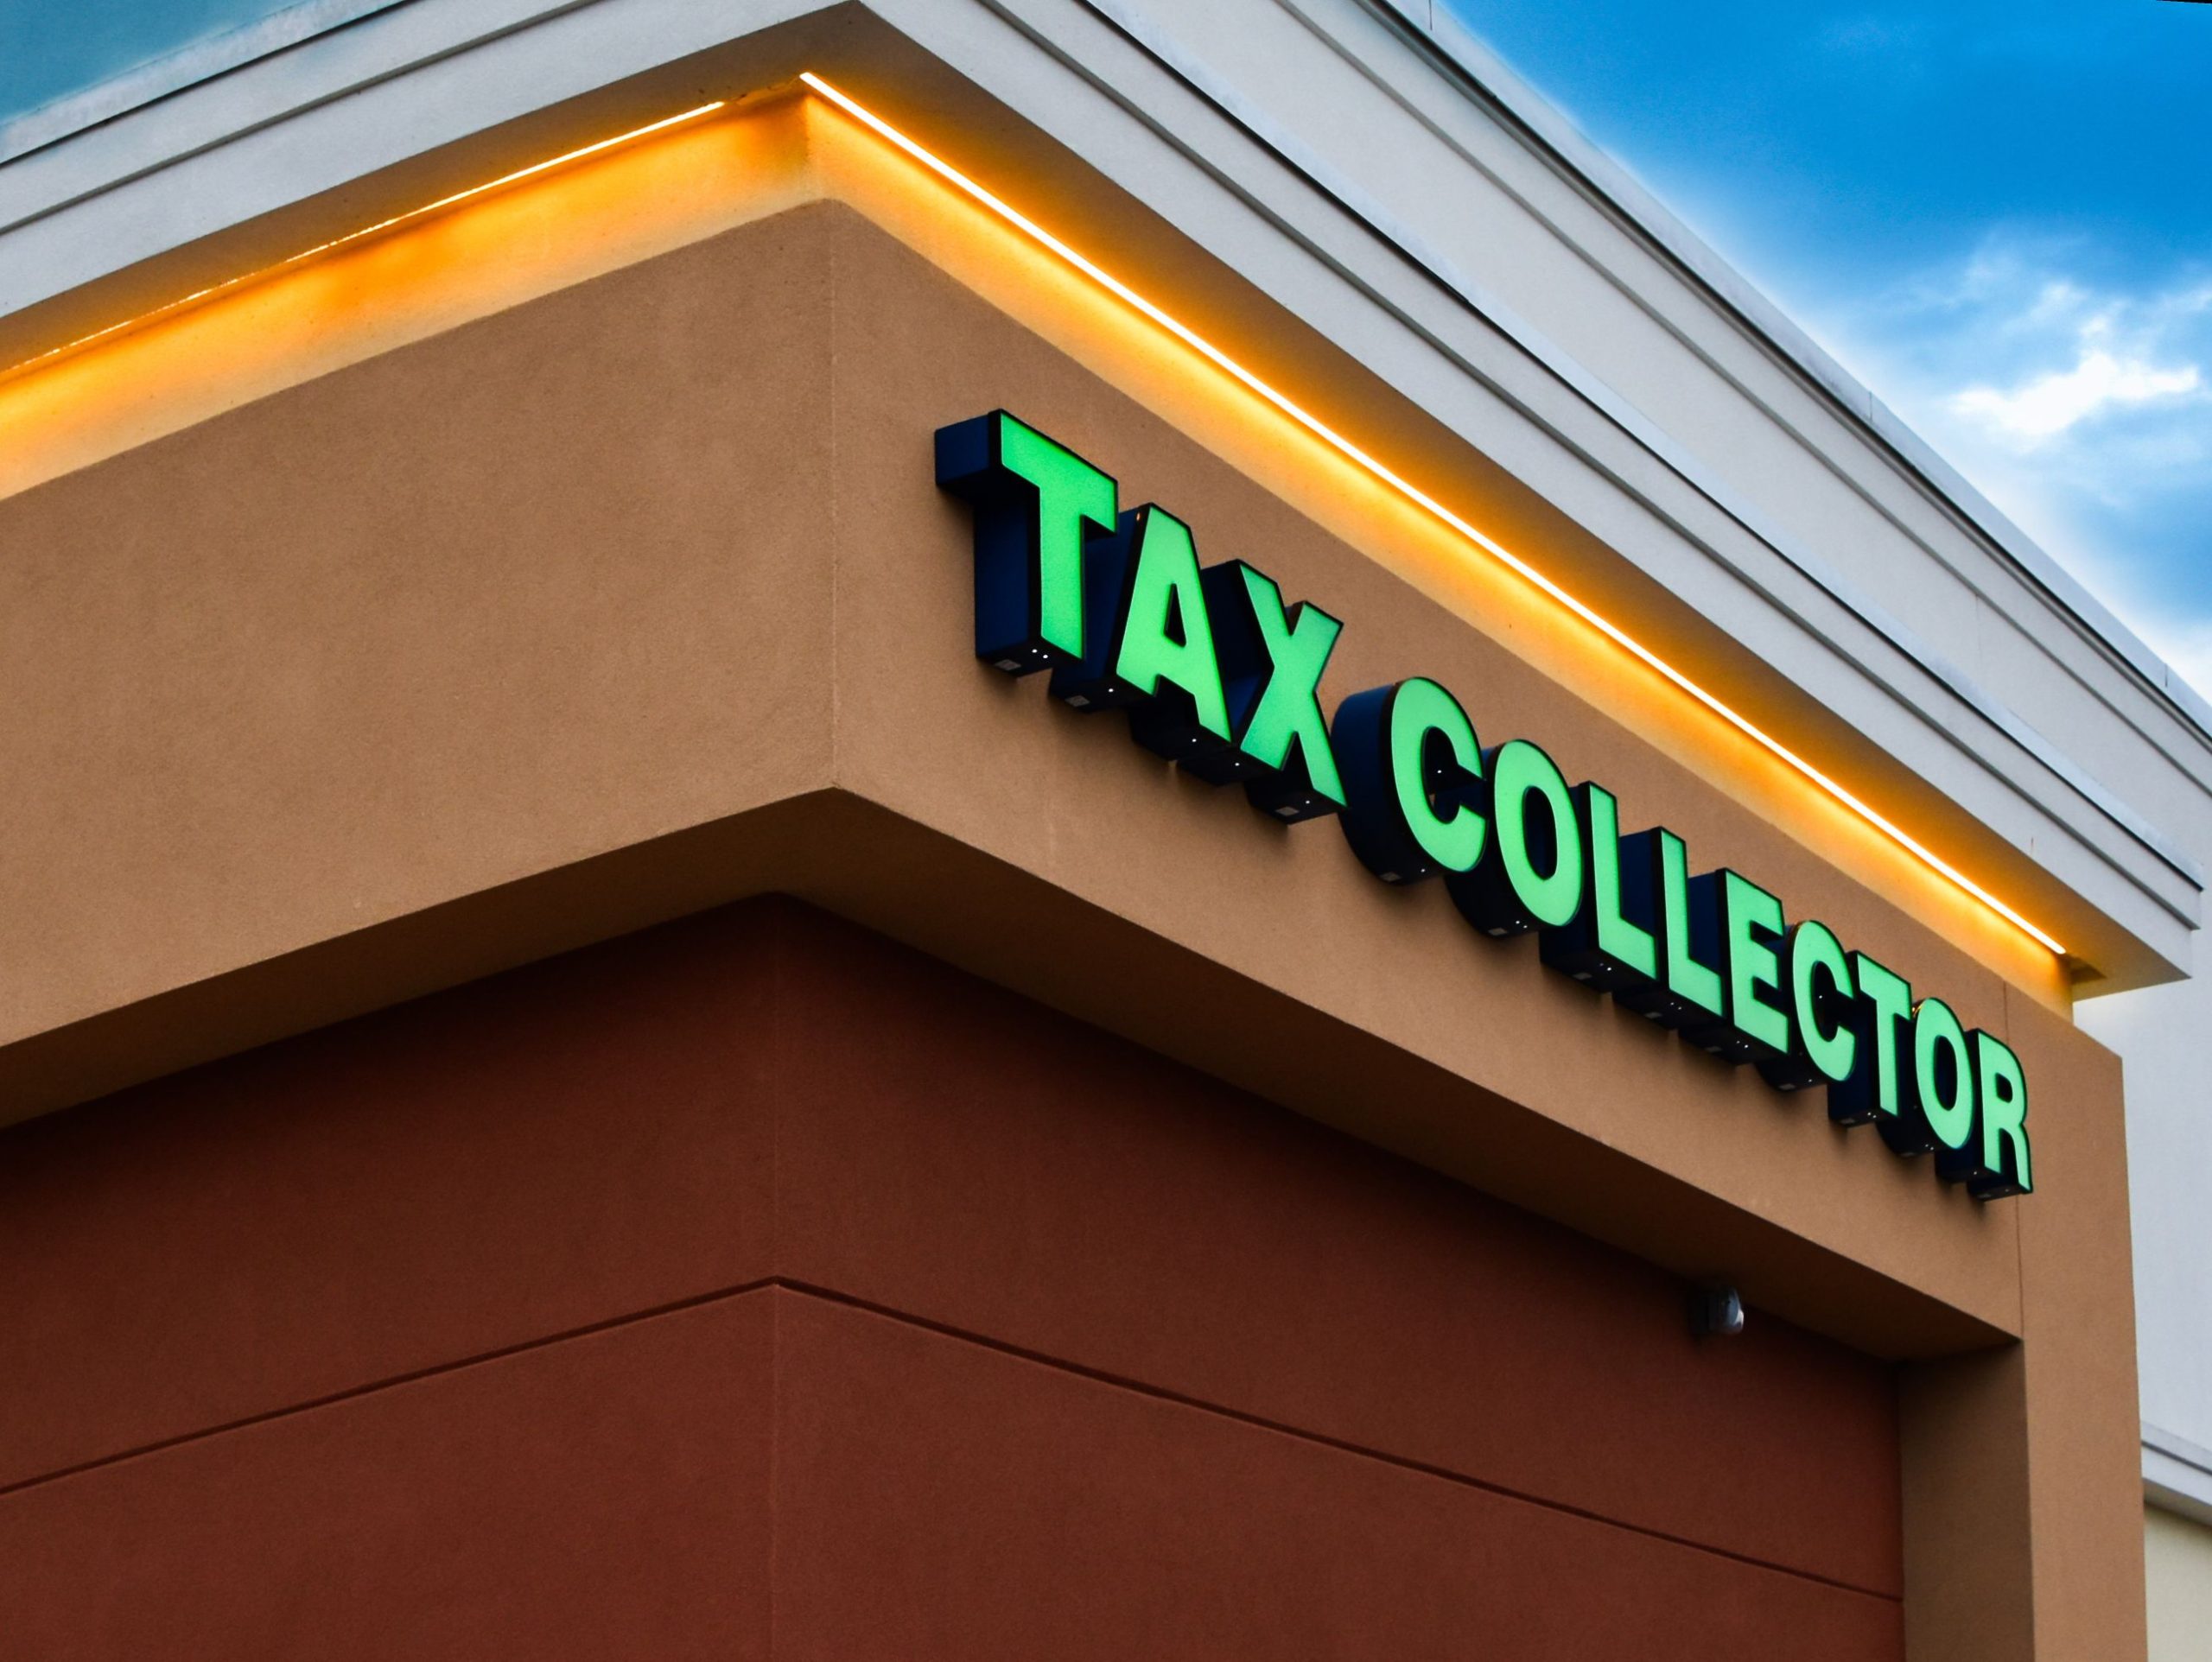 tax collector office gainesville fl hours